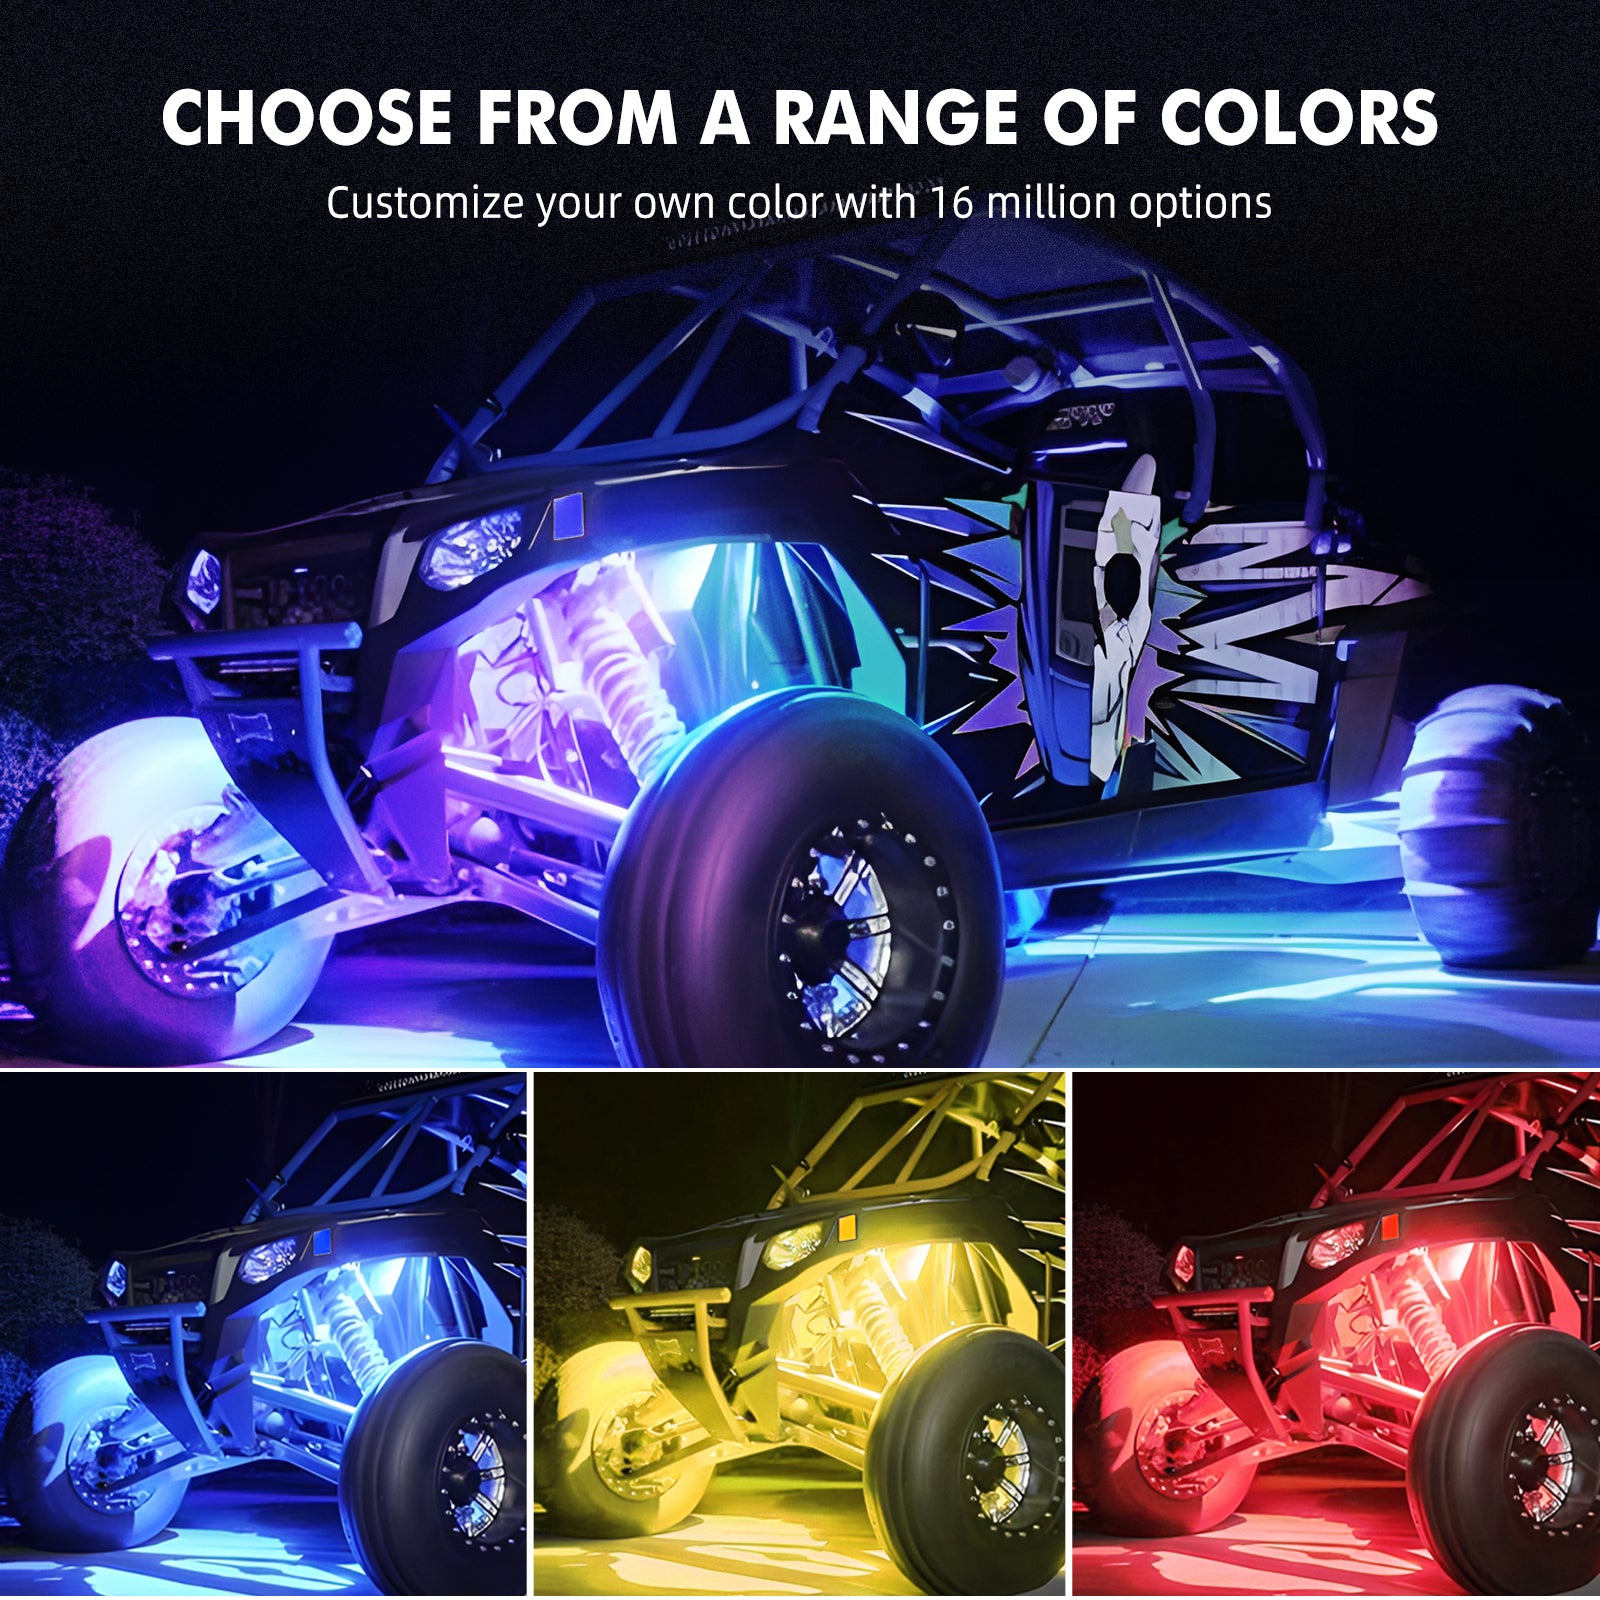 BEVINSEE 6/8 Pods Wide Angle RGB LED Rock Lights APP/Remote Control Neon LED Under Car Chase Lighting Kits for Off-Road UTV ATV Touring